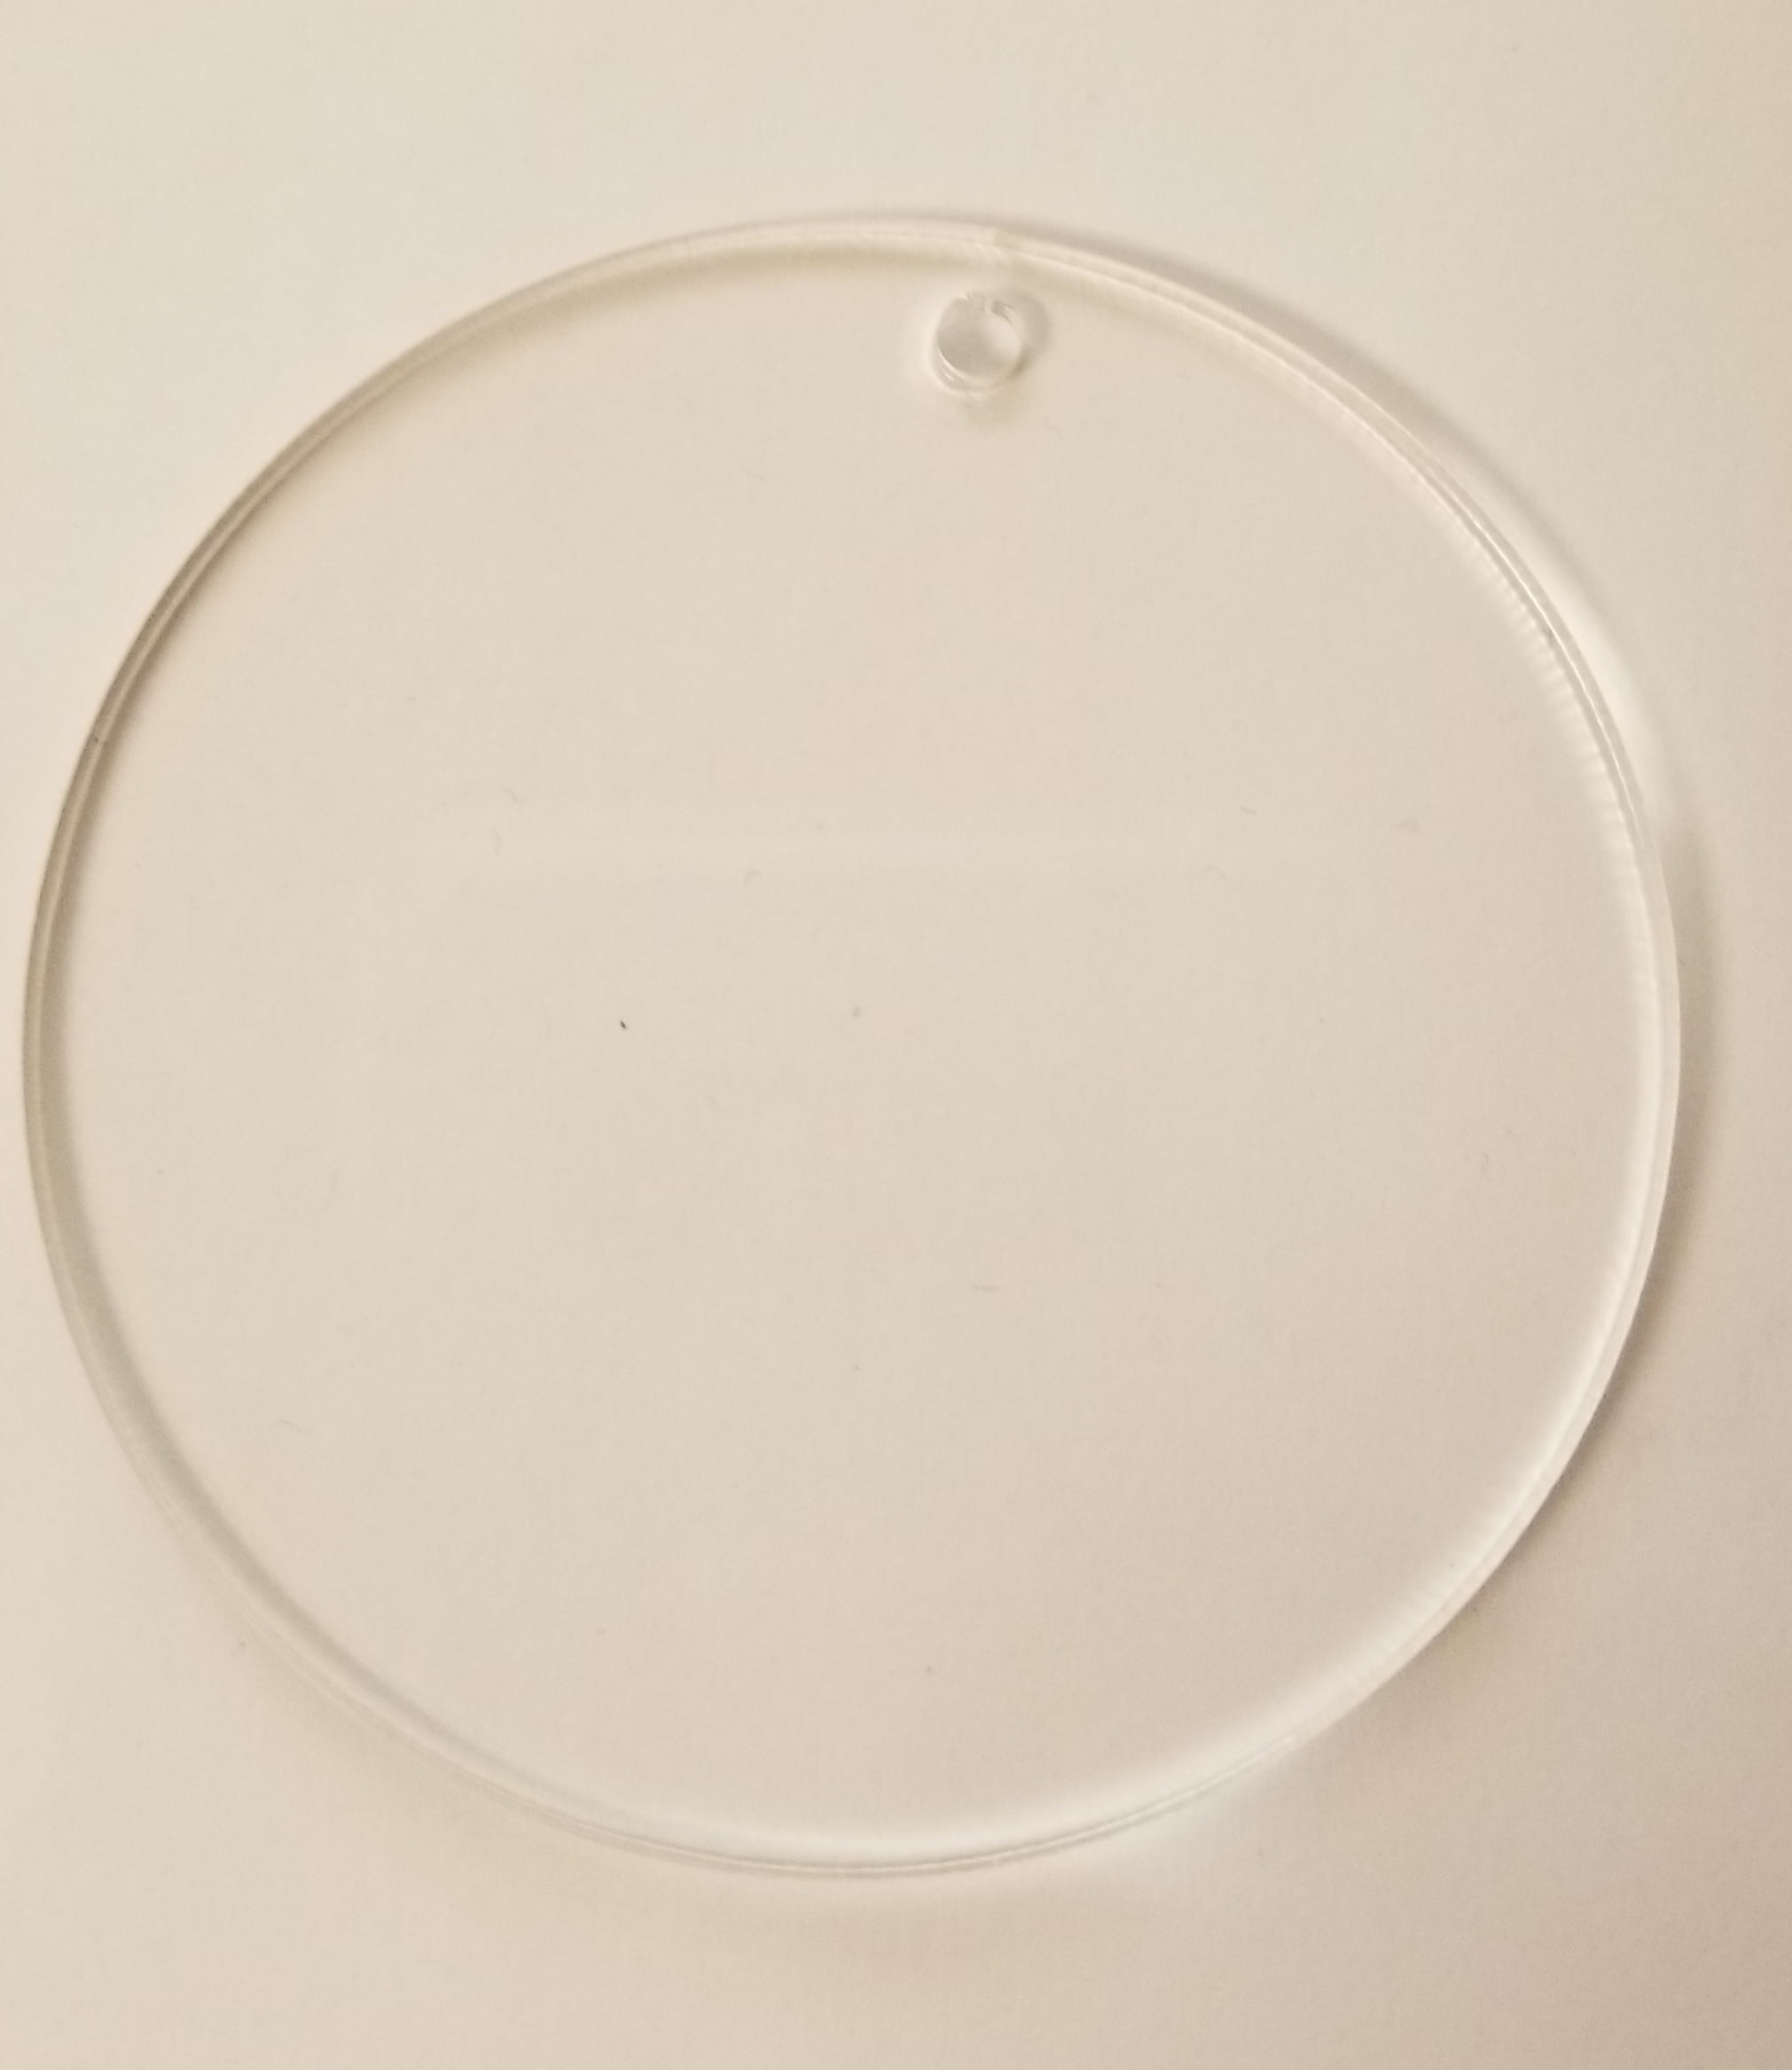 60 Pieces 3 Inch Clear Acrylic Circles Blank Transparent Acrylic Disc Blank Round Circle Plastic Disc Acrylic Sheet for Wedding Vinyl Project Painting DIY Craft Holiday Ornament 